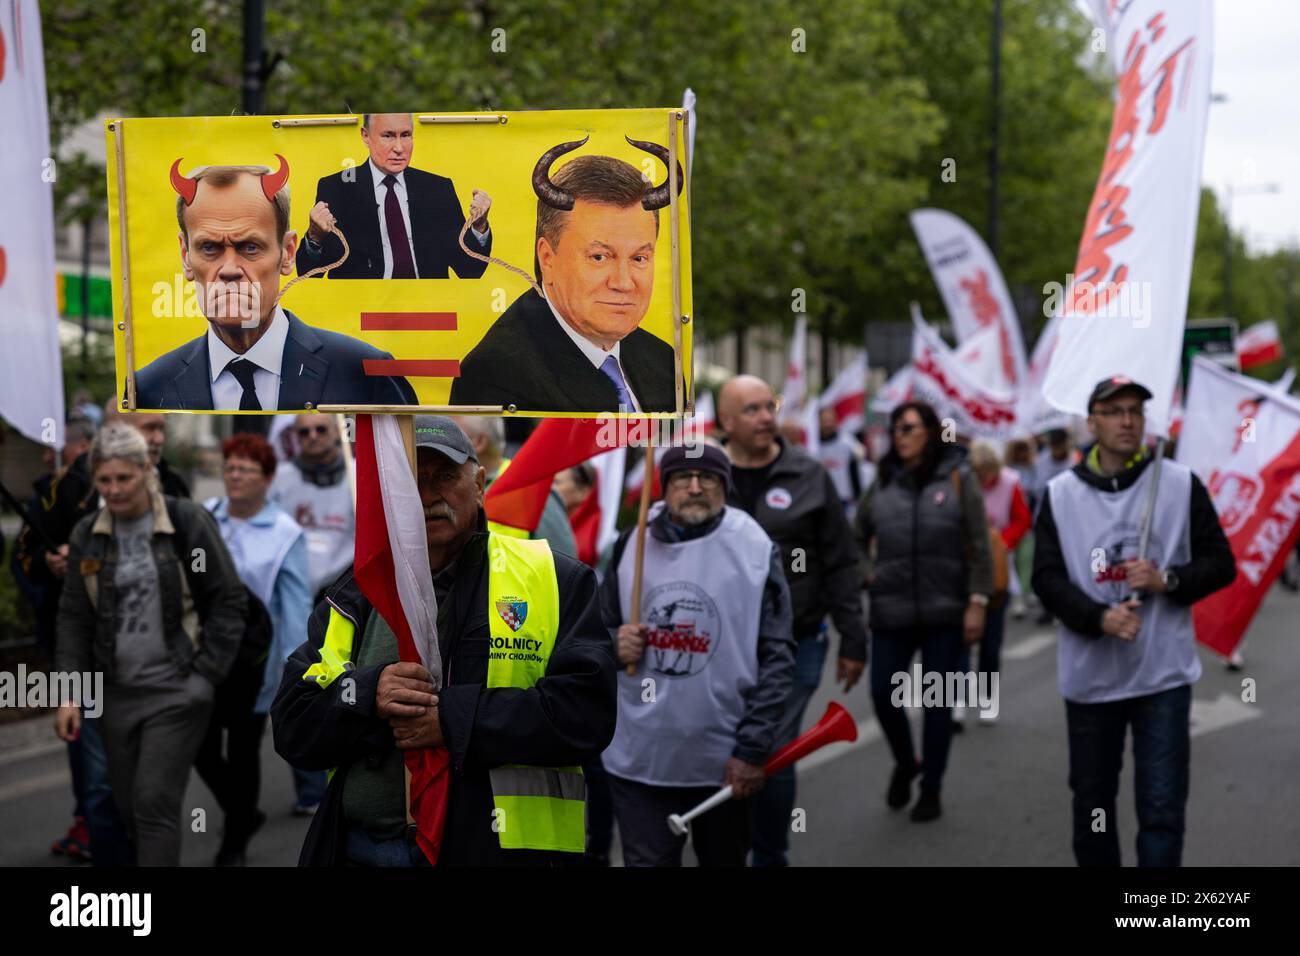 May 10, 2024, Warsaw, Mazovian Province, Poland: A protester holds a banner with images of Russian President Vladimir Putin, Polish Prime Minister Donald Tusk and former Ukrainian president Viktor Yanukovych, comparing the latter two to each other, during a protest against the European Union's Green Deal ahead of EU parliamentary elections, in Warsaw. The protest was organized by the Independent Self-Governing Trade Union ''Solidarity'', farmers, right-wing and anti-EU movements with the participation of Law and Justice and Confederation politicians. (Credit Image: © Maciek Jazwiecki/ZUMA Pres Stock Photo